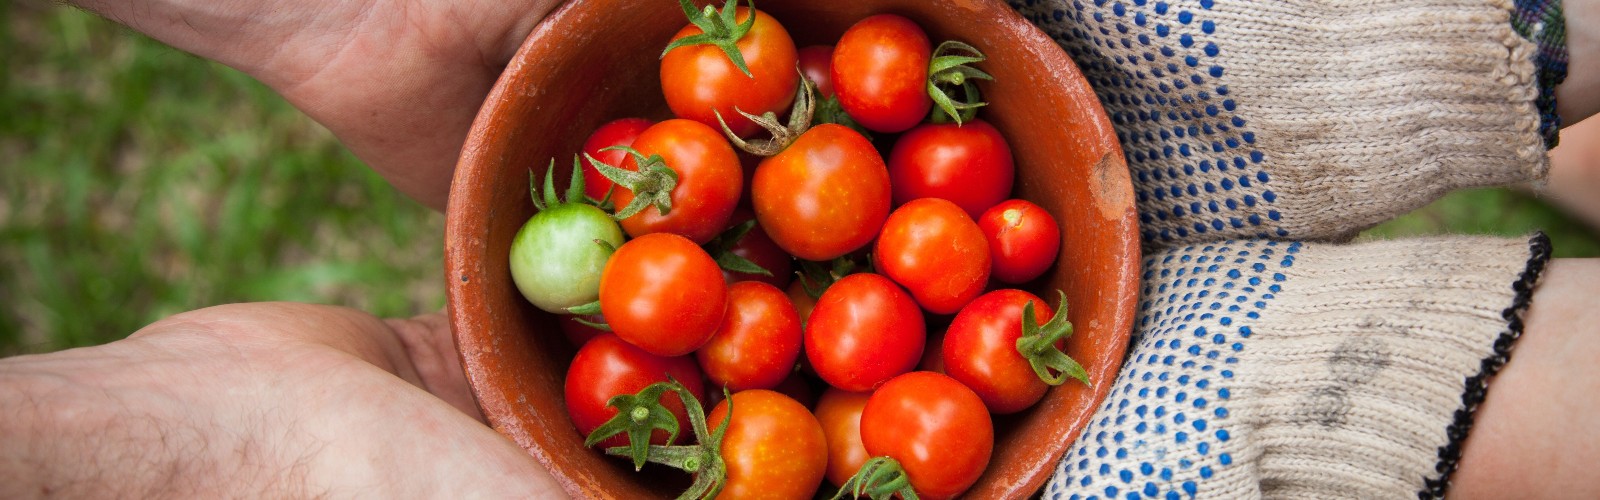 Red Tomatoes and one green Tomatoes in a bowl. The bowl is being handed to another person wearing grey gardening gloves.